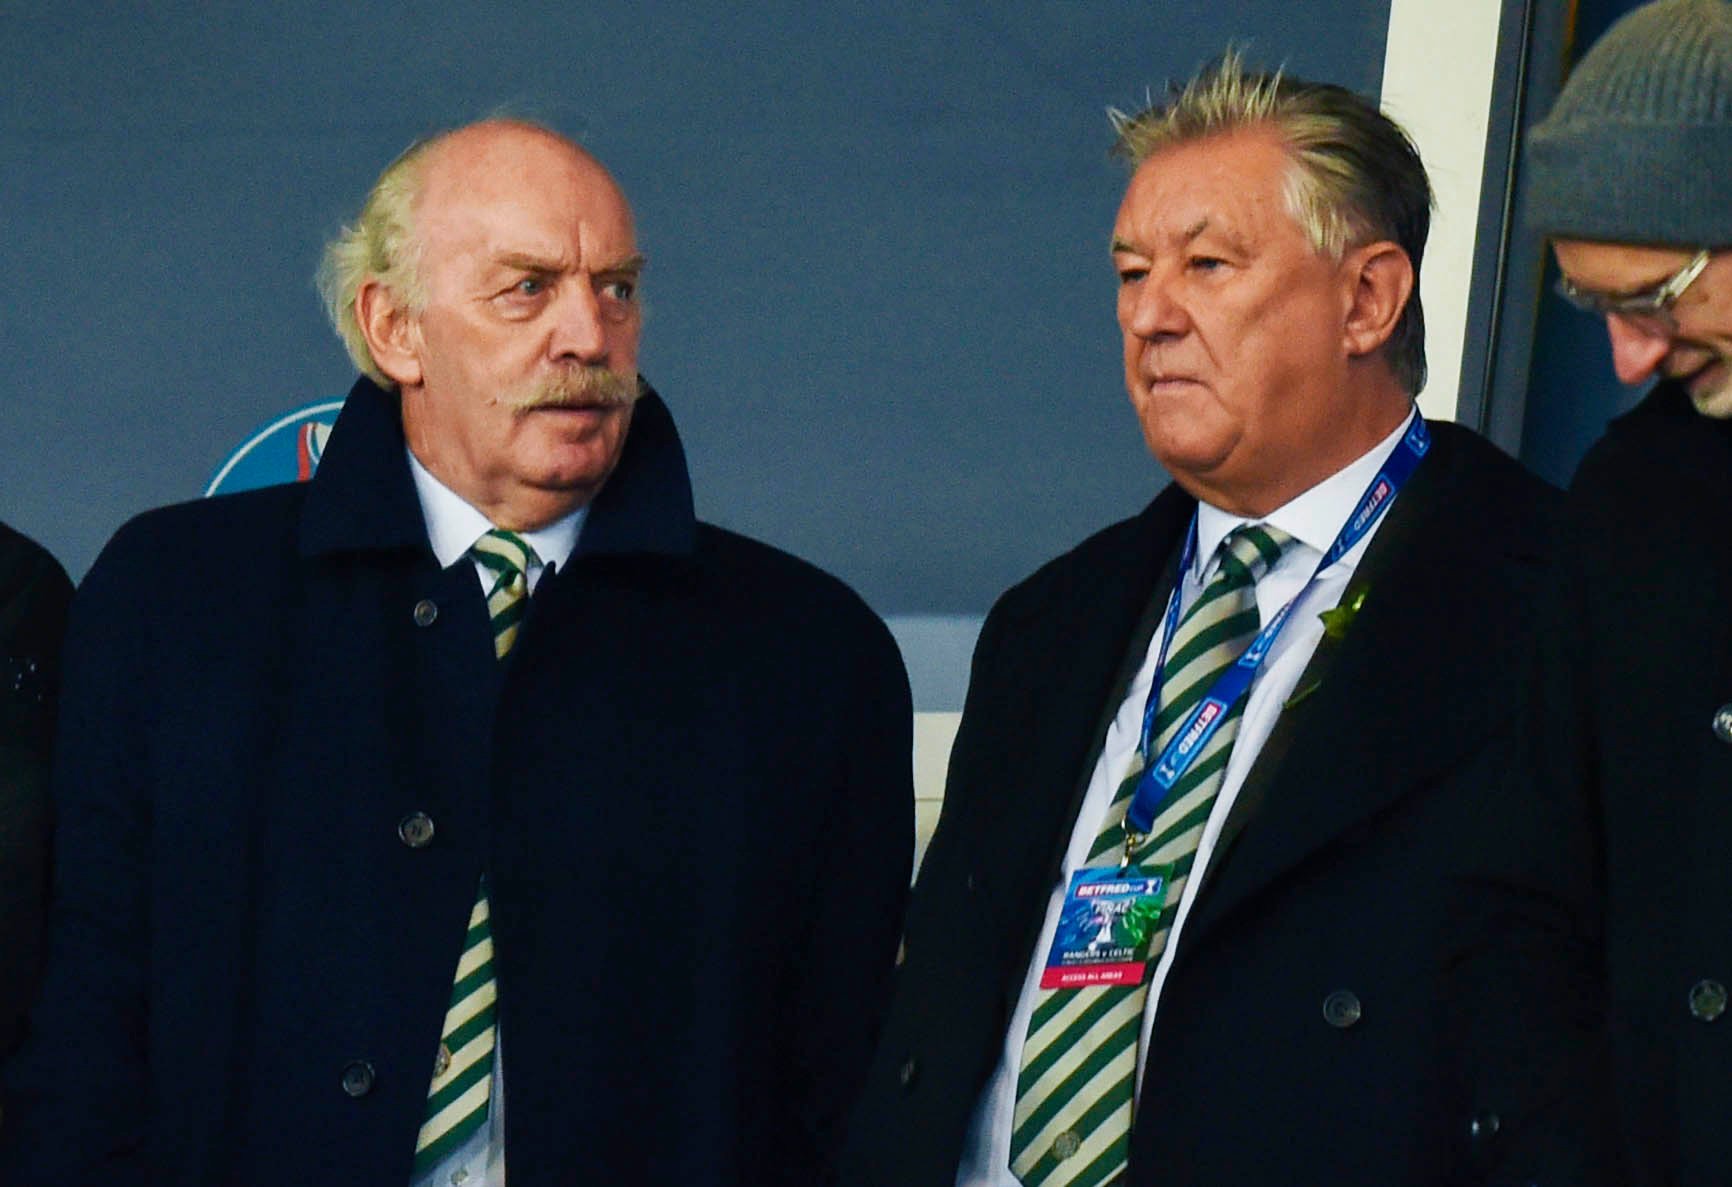 Celtic AGM: Peter Lawwell counters 'asleep at the wheel' accusation with £35m claim